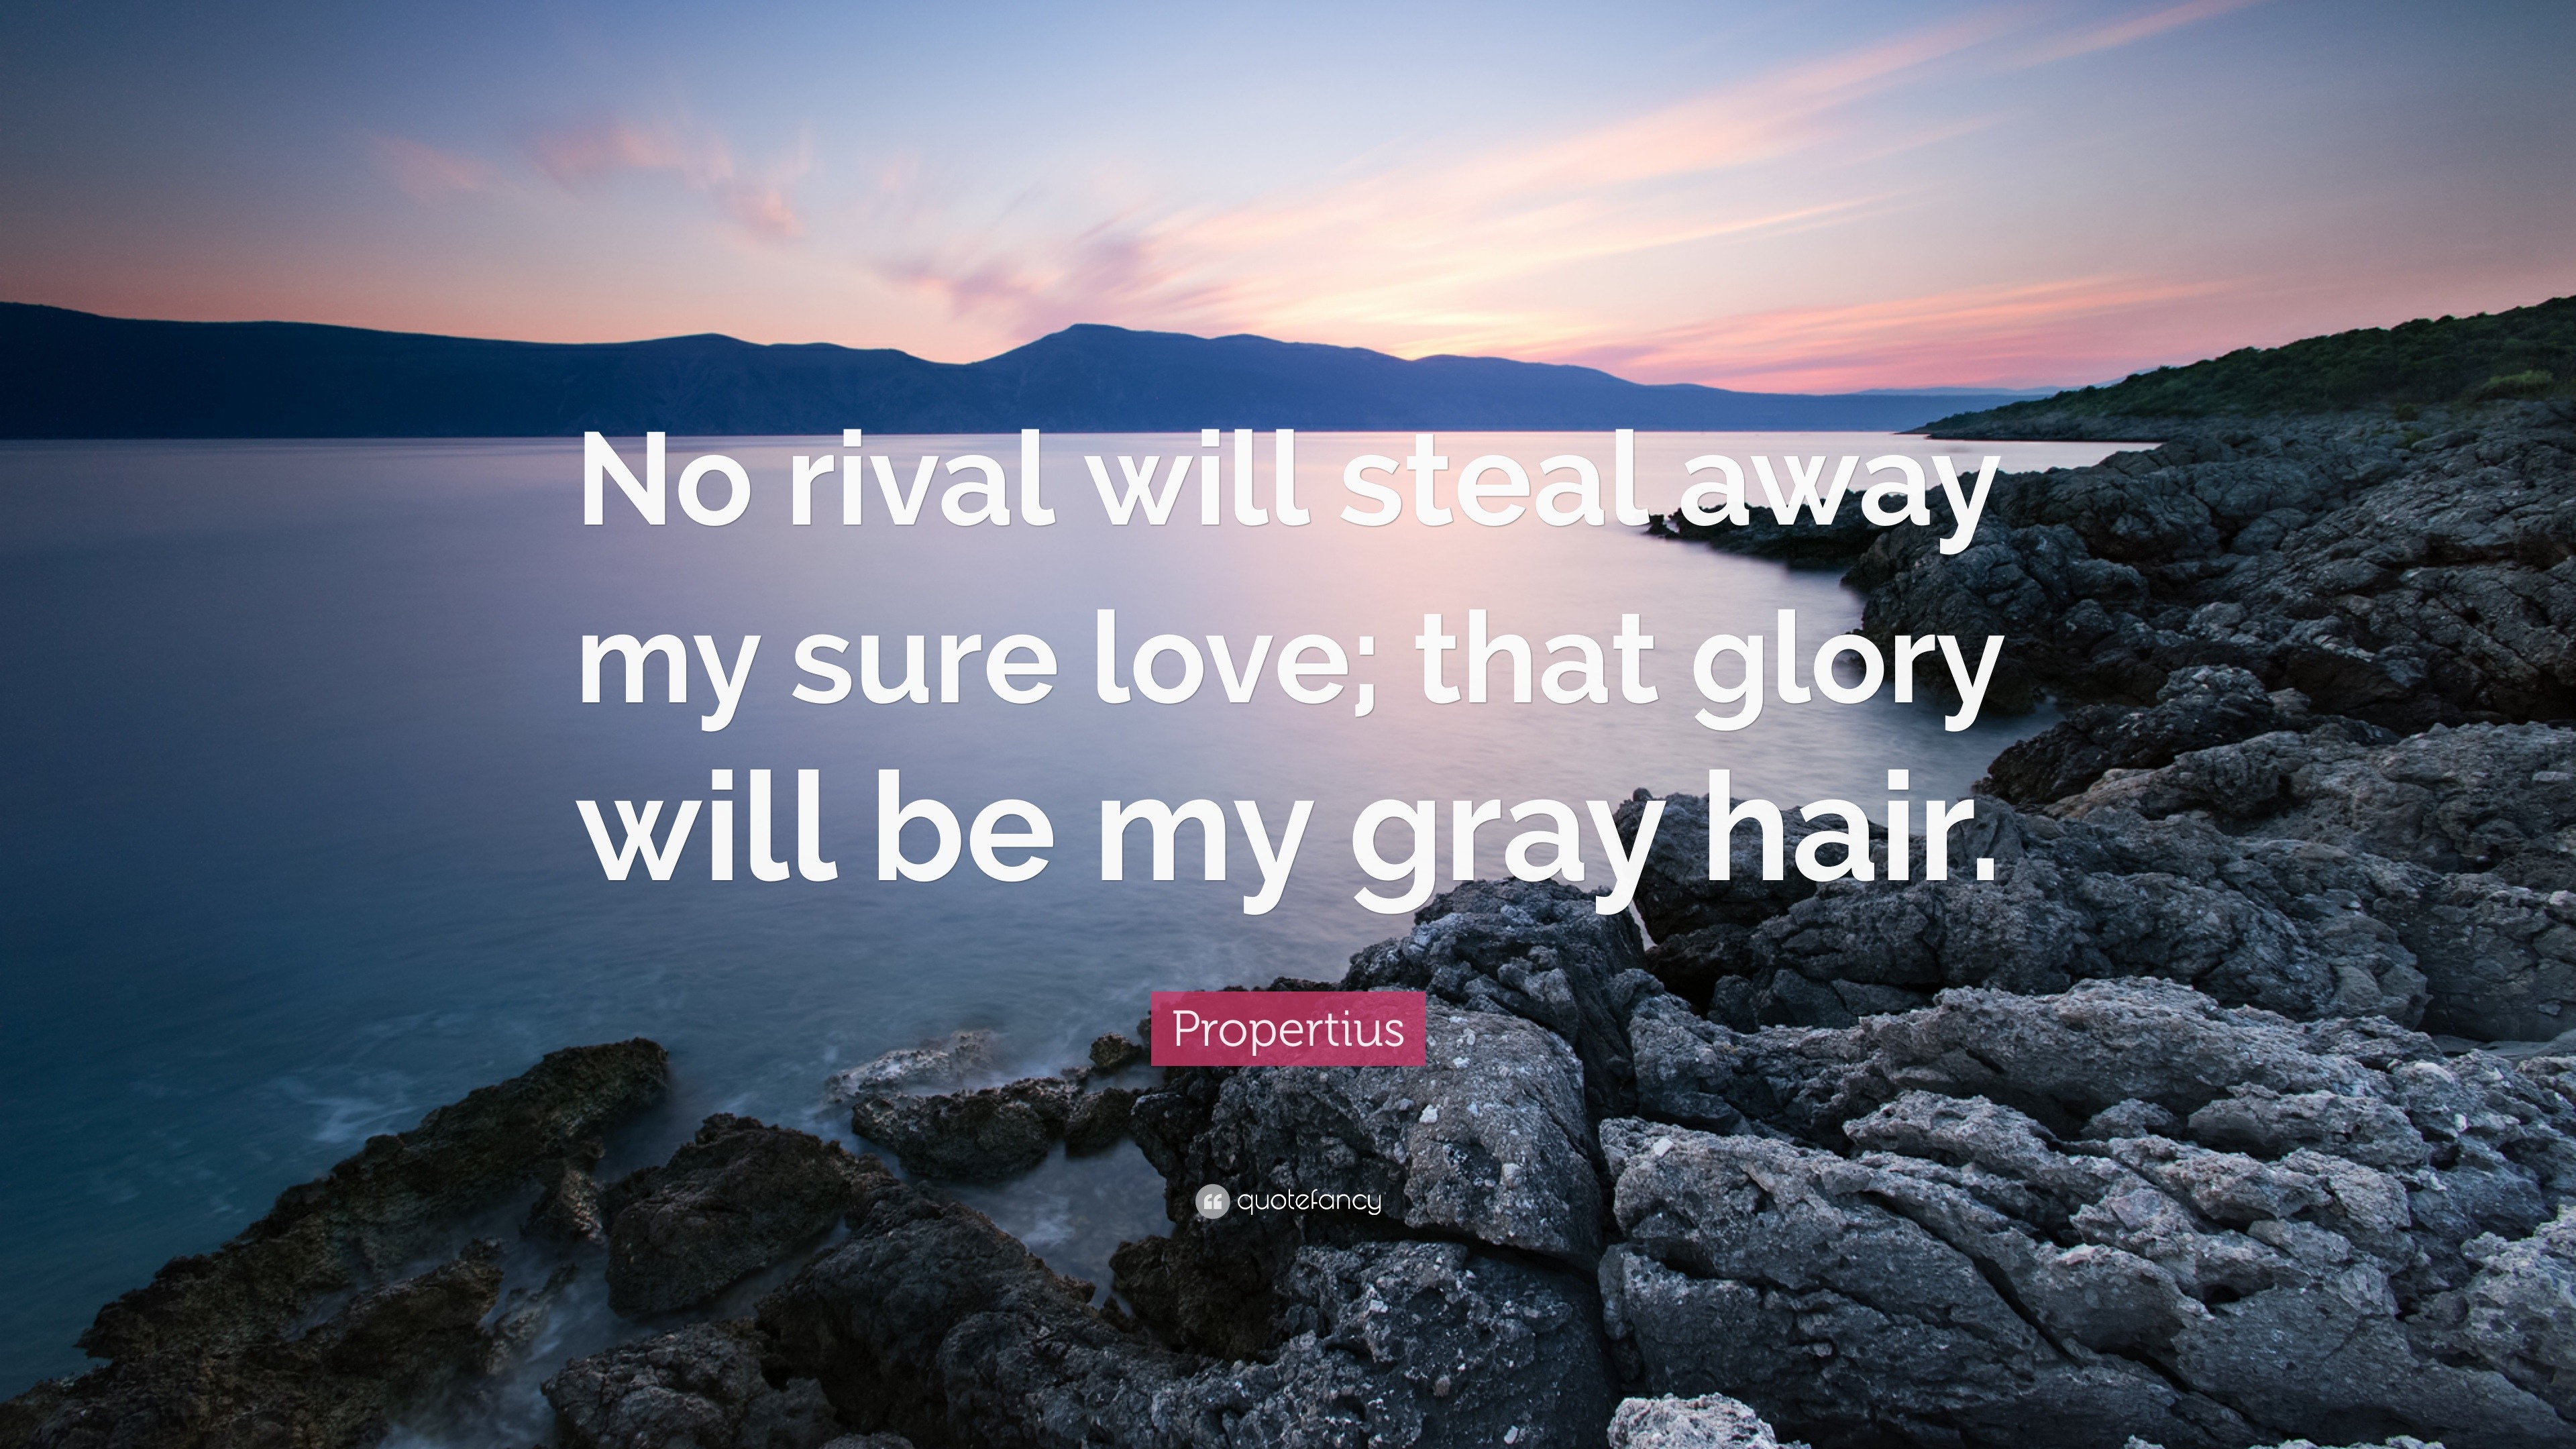 Propertius Quote: “No rival will steal away my sure love; that glory will  be my gray